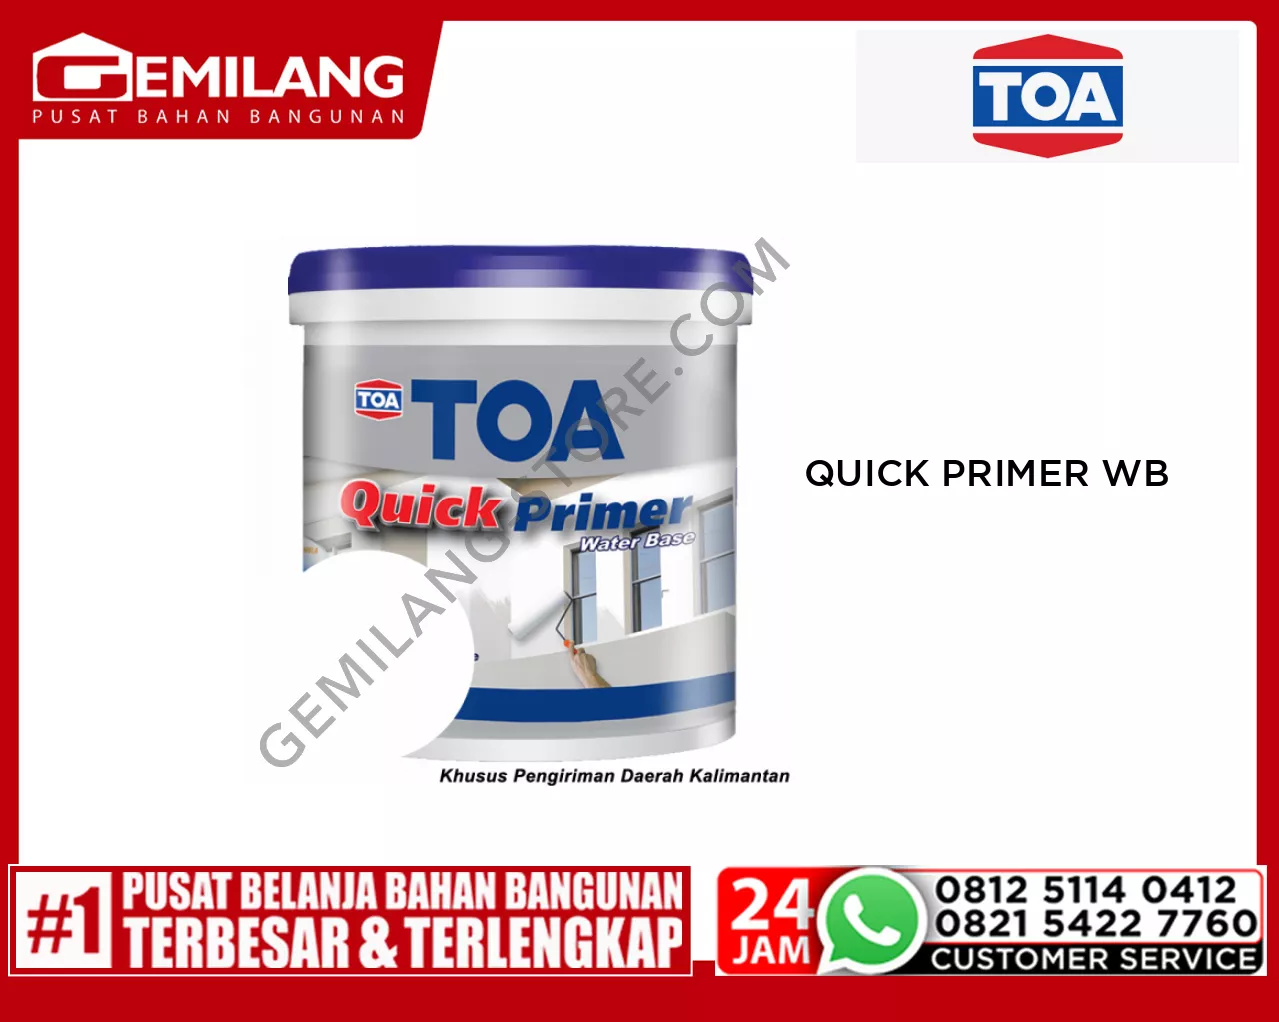 TOA QUICK PRIMER WATER BASE 2.5ltr (11030-00028)